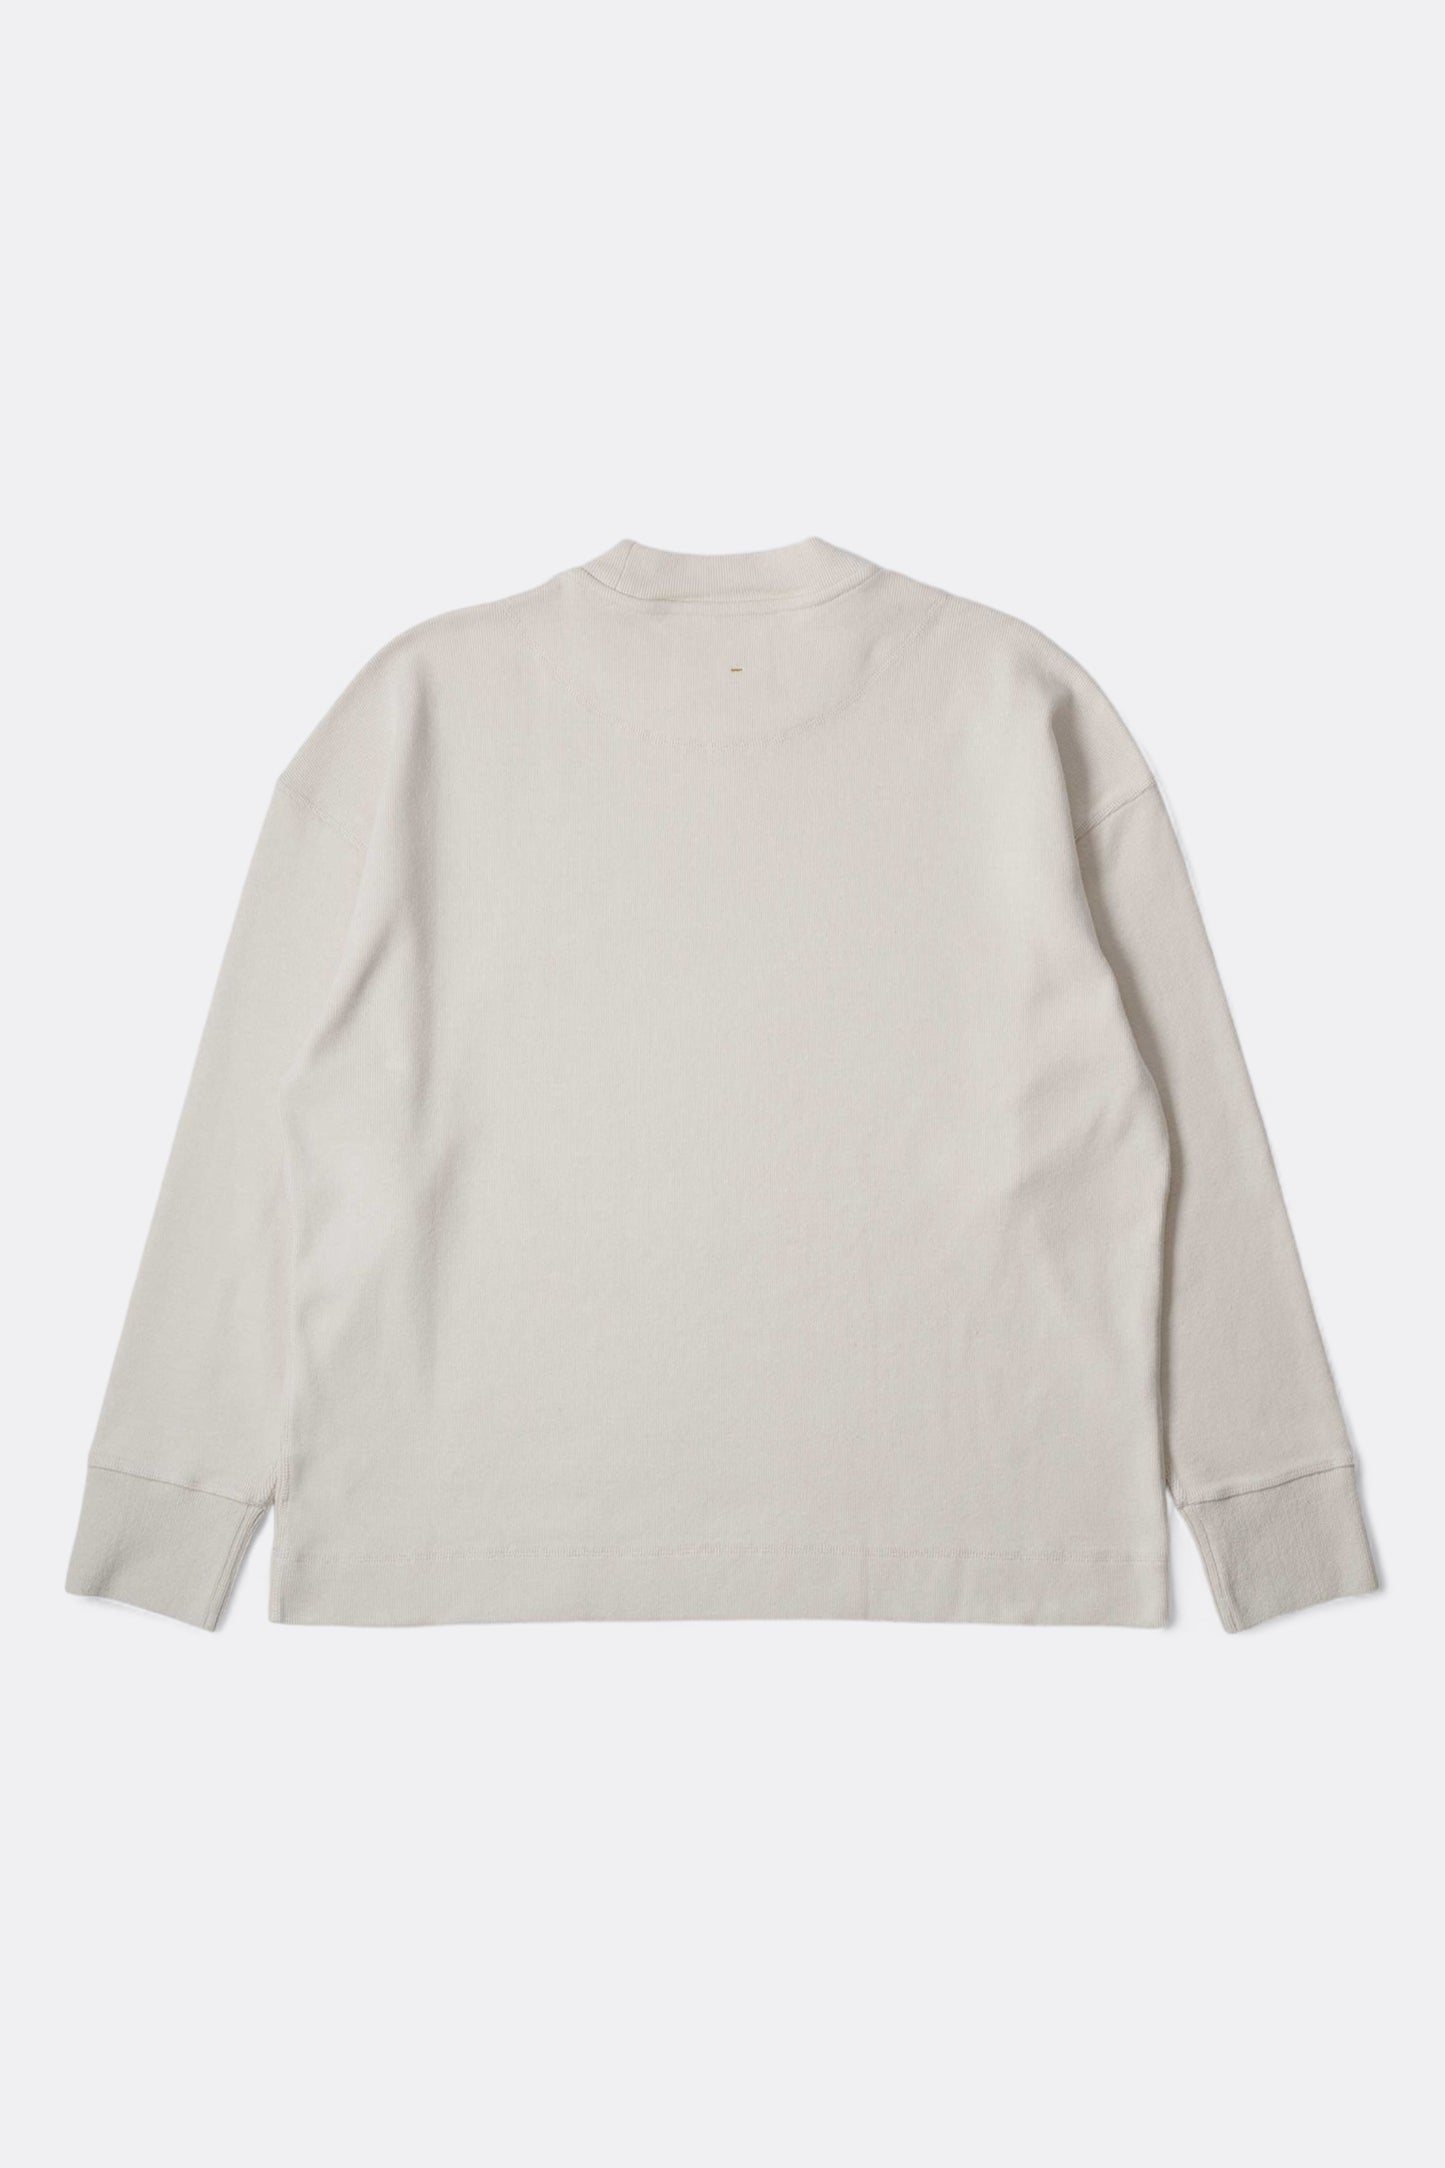 Margaret Howell - MHL. Oversized Thermal Dry Cotton Rib Jersey (Off White)